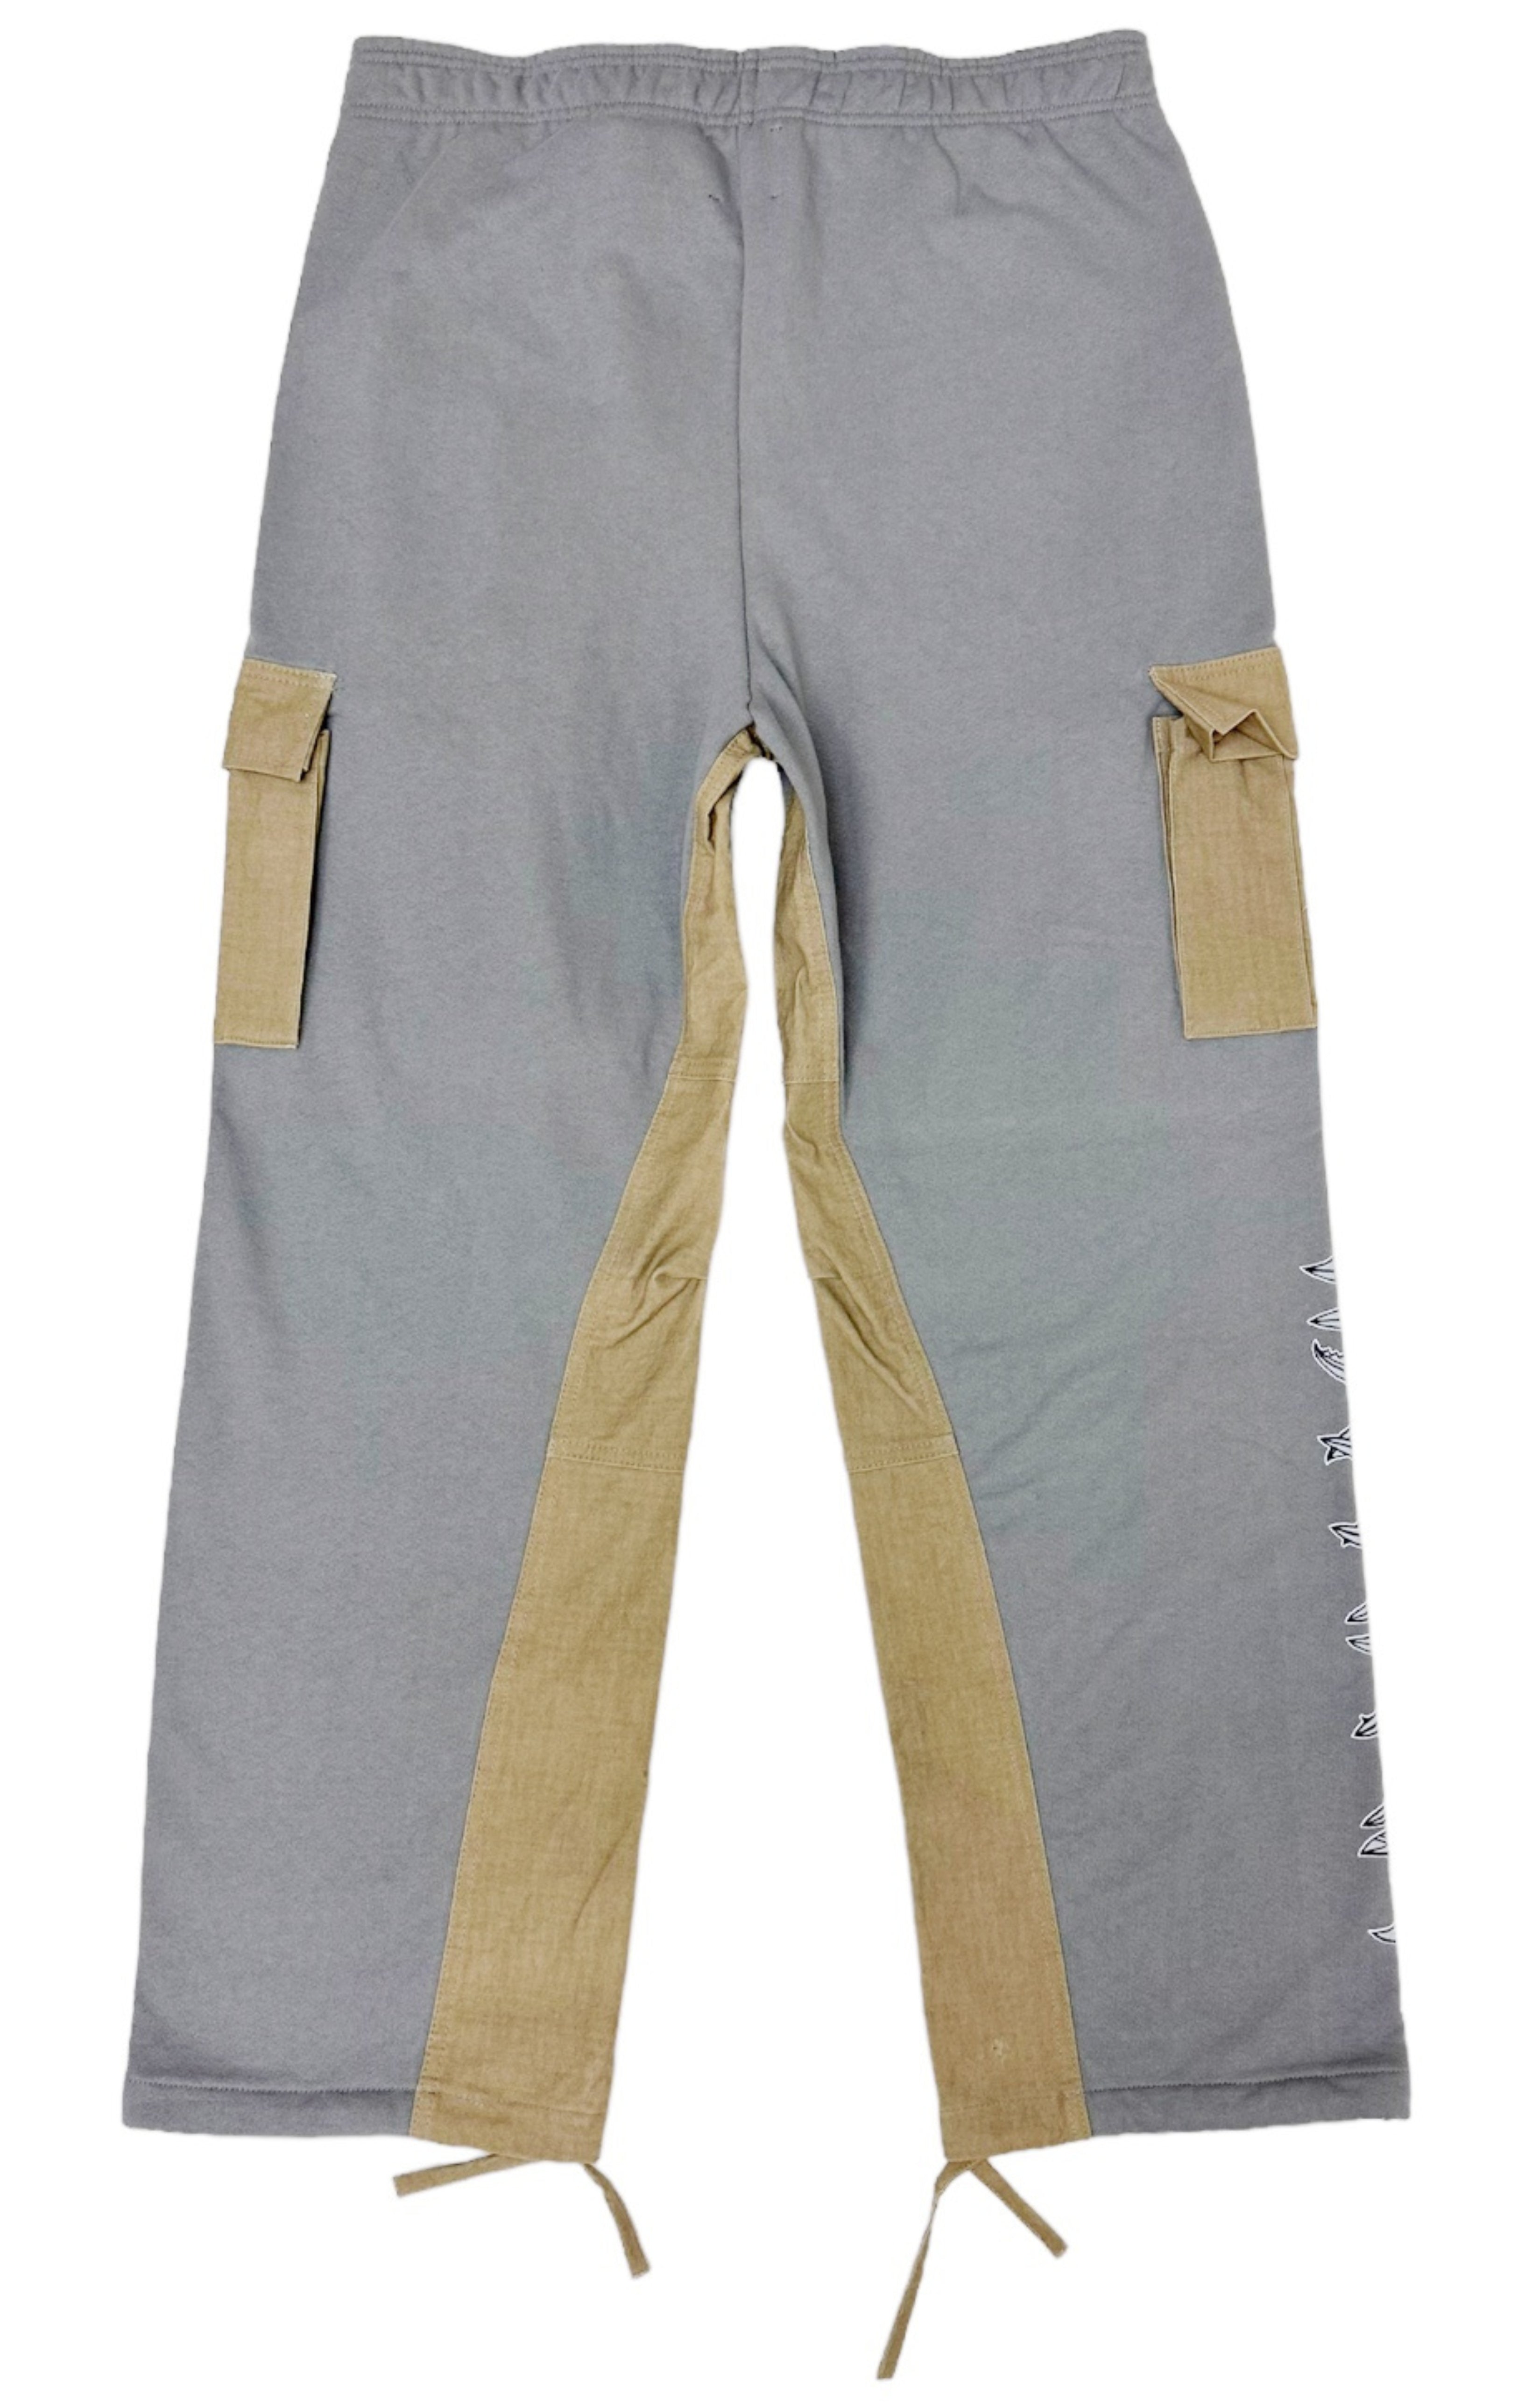 WARREN LOTAS (RARE & NEW) with tags Pants Size: 2XL